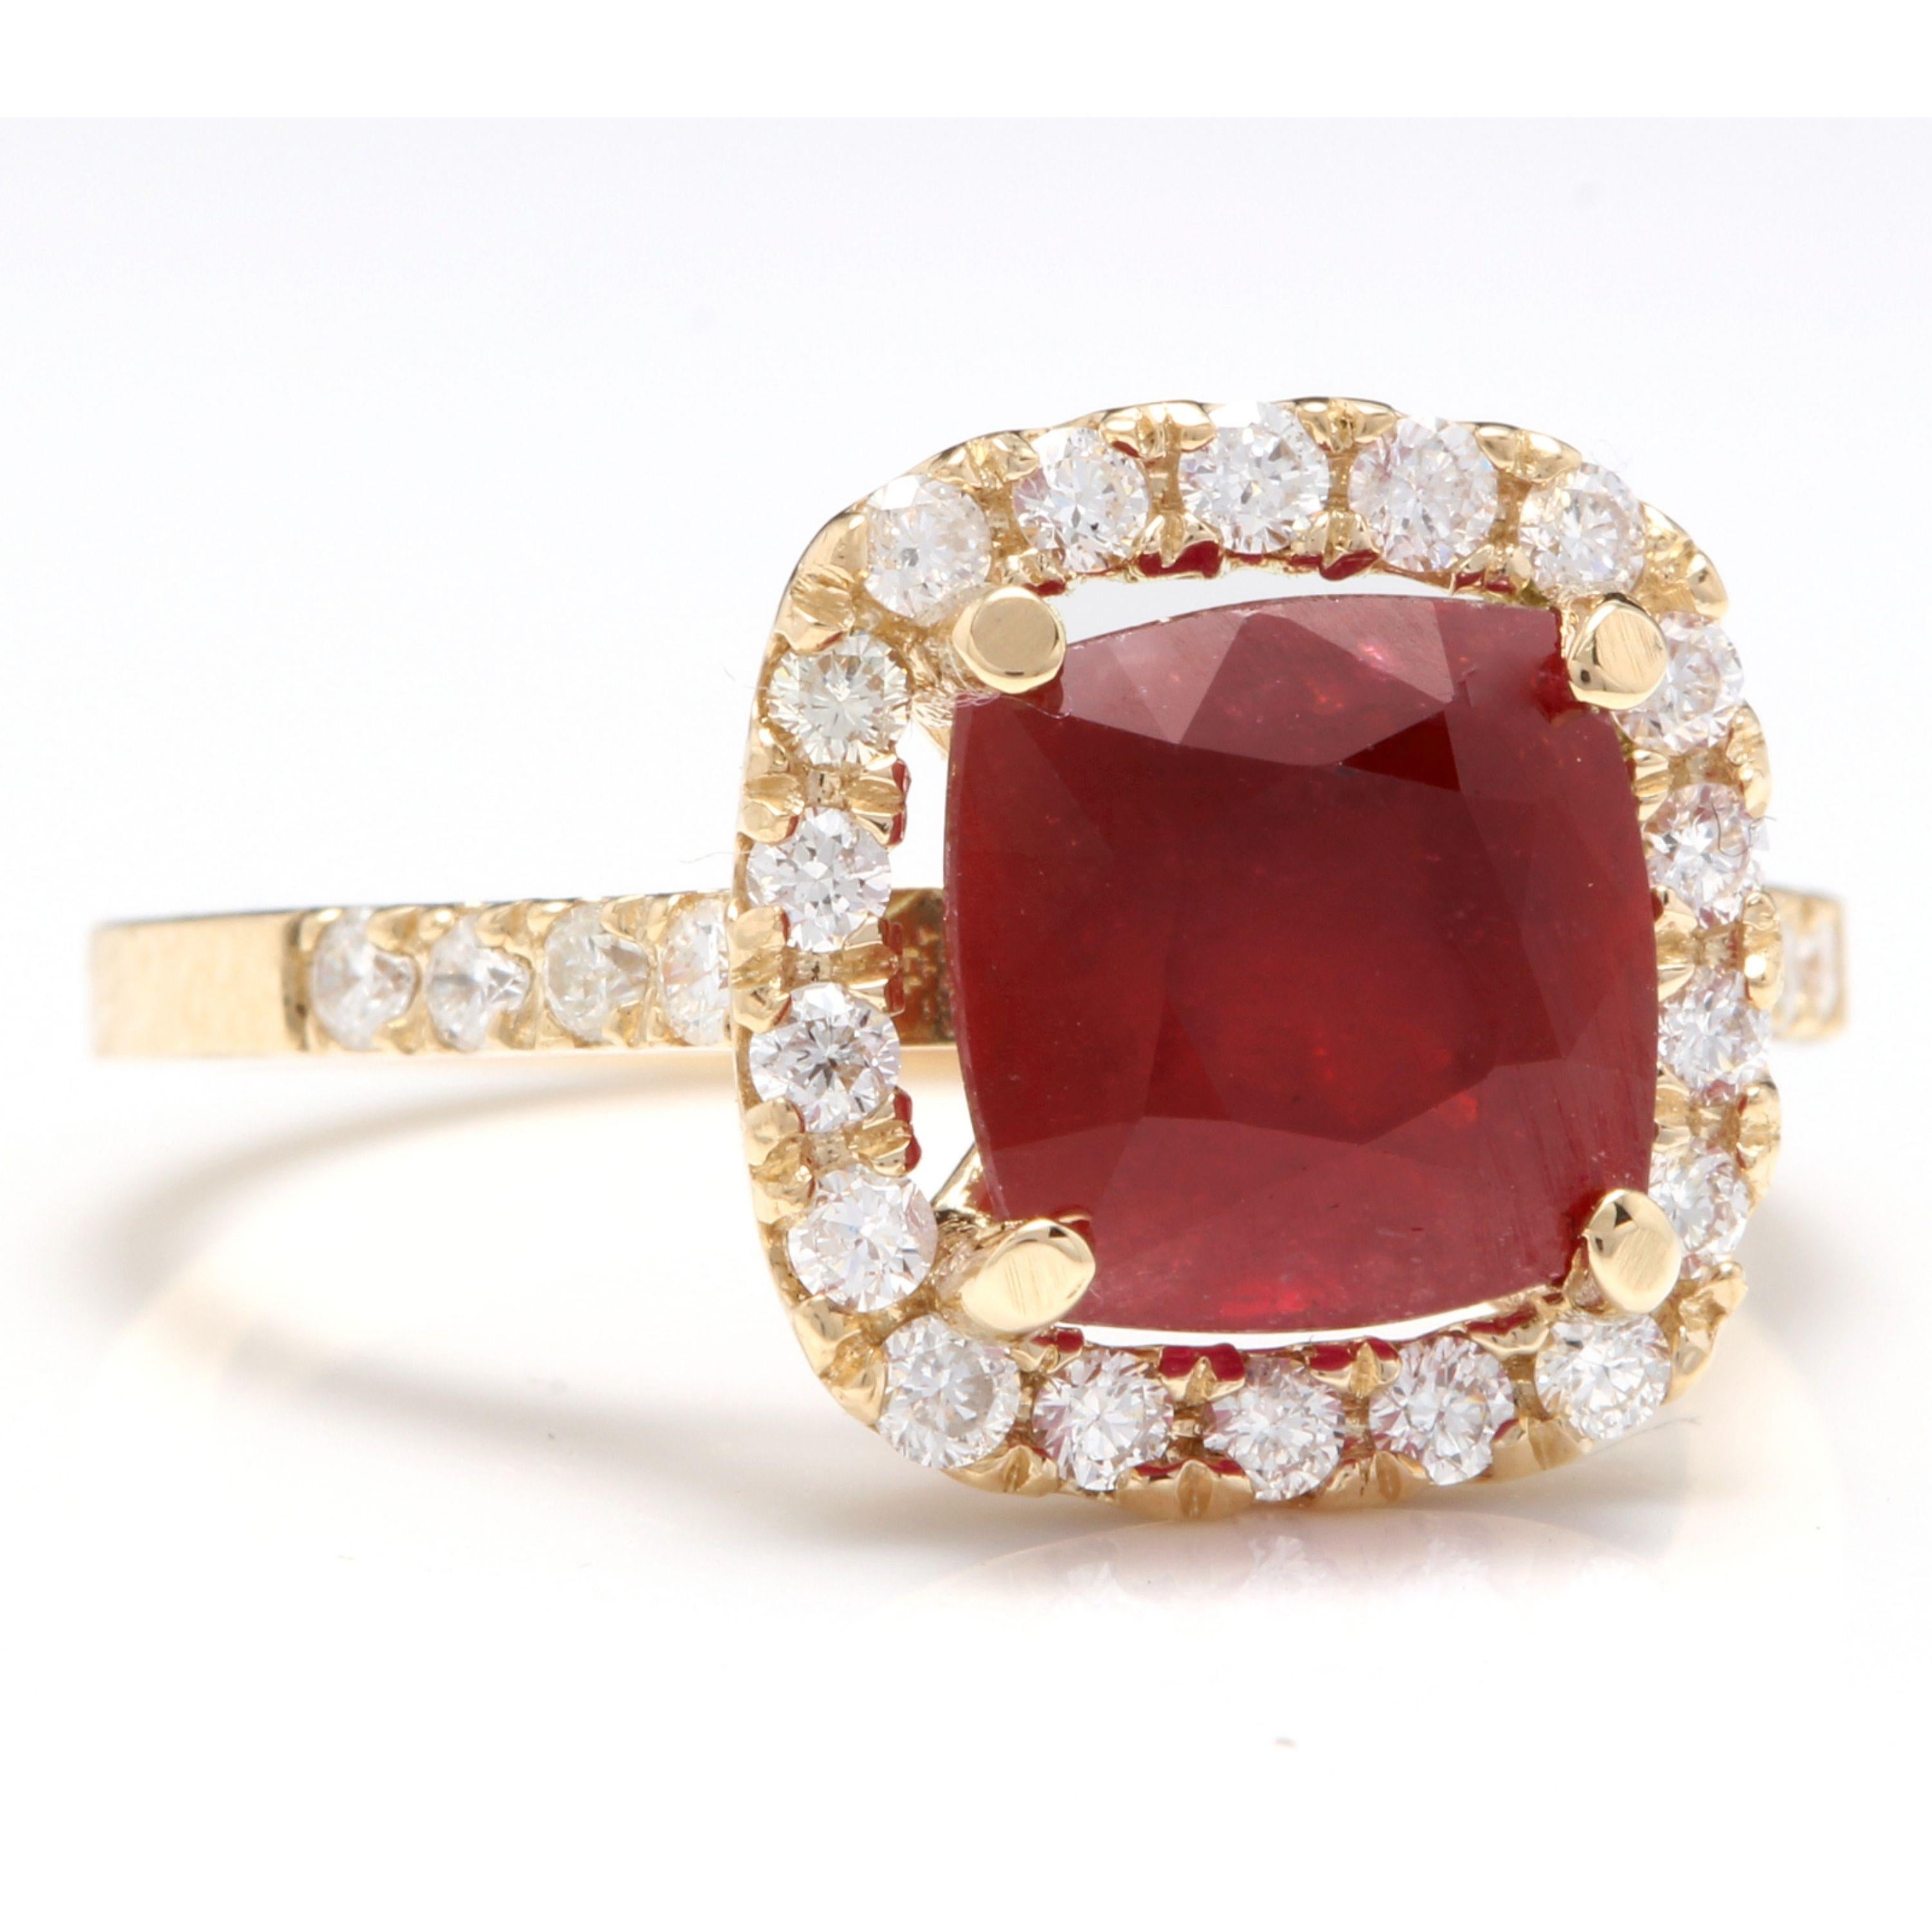 4.60 Carats Impressive Red Ruby and Natural Diamond 14K Yellow Gold Ring

Total Red Ruby Weight is: Approx. 4.00 Carats

Ruby Treatment: Lead Glass Filling

Ruby Measures: Approx. 8.00 x 8.00mm

Natural Round Diamonds Weight: Approx. 0.60 Carats